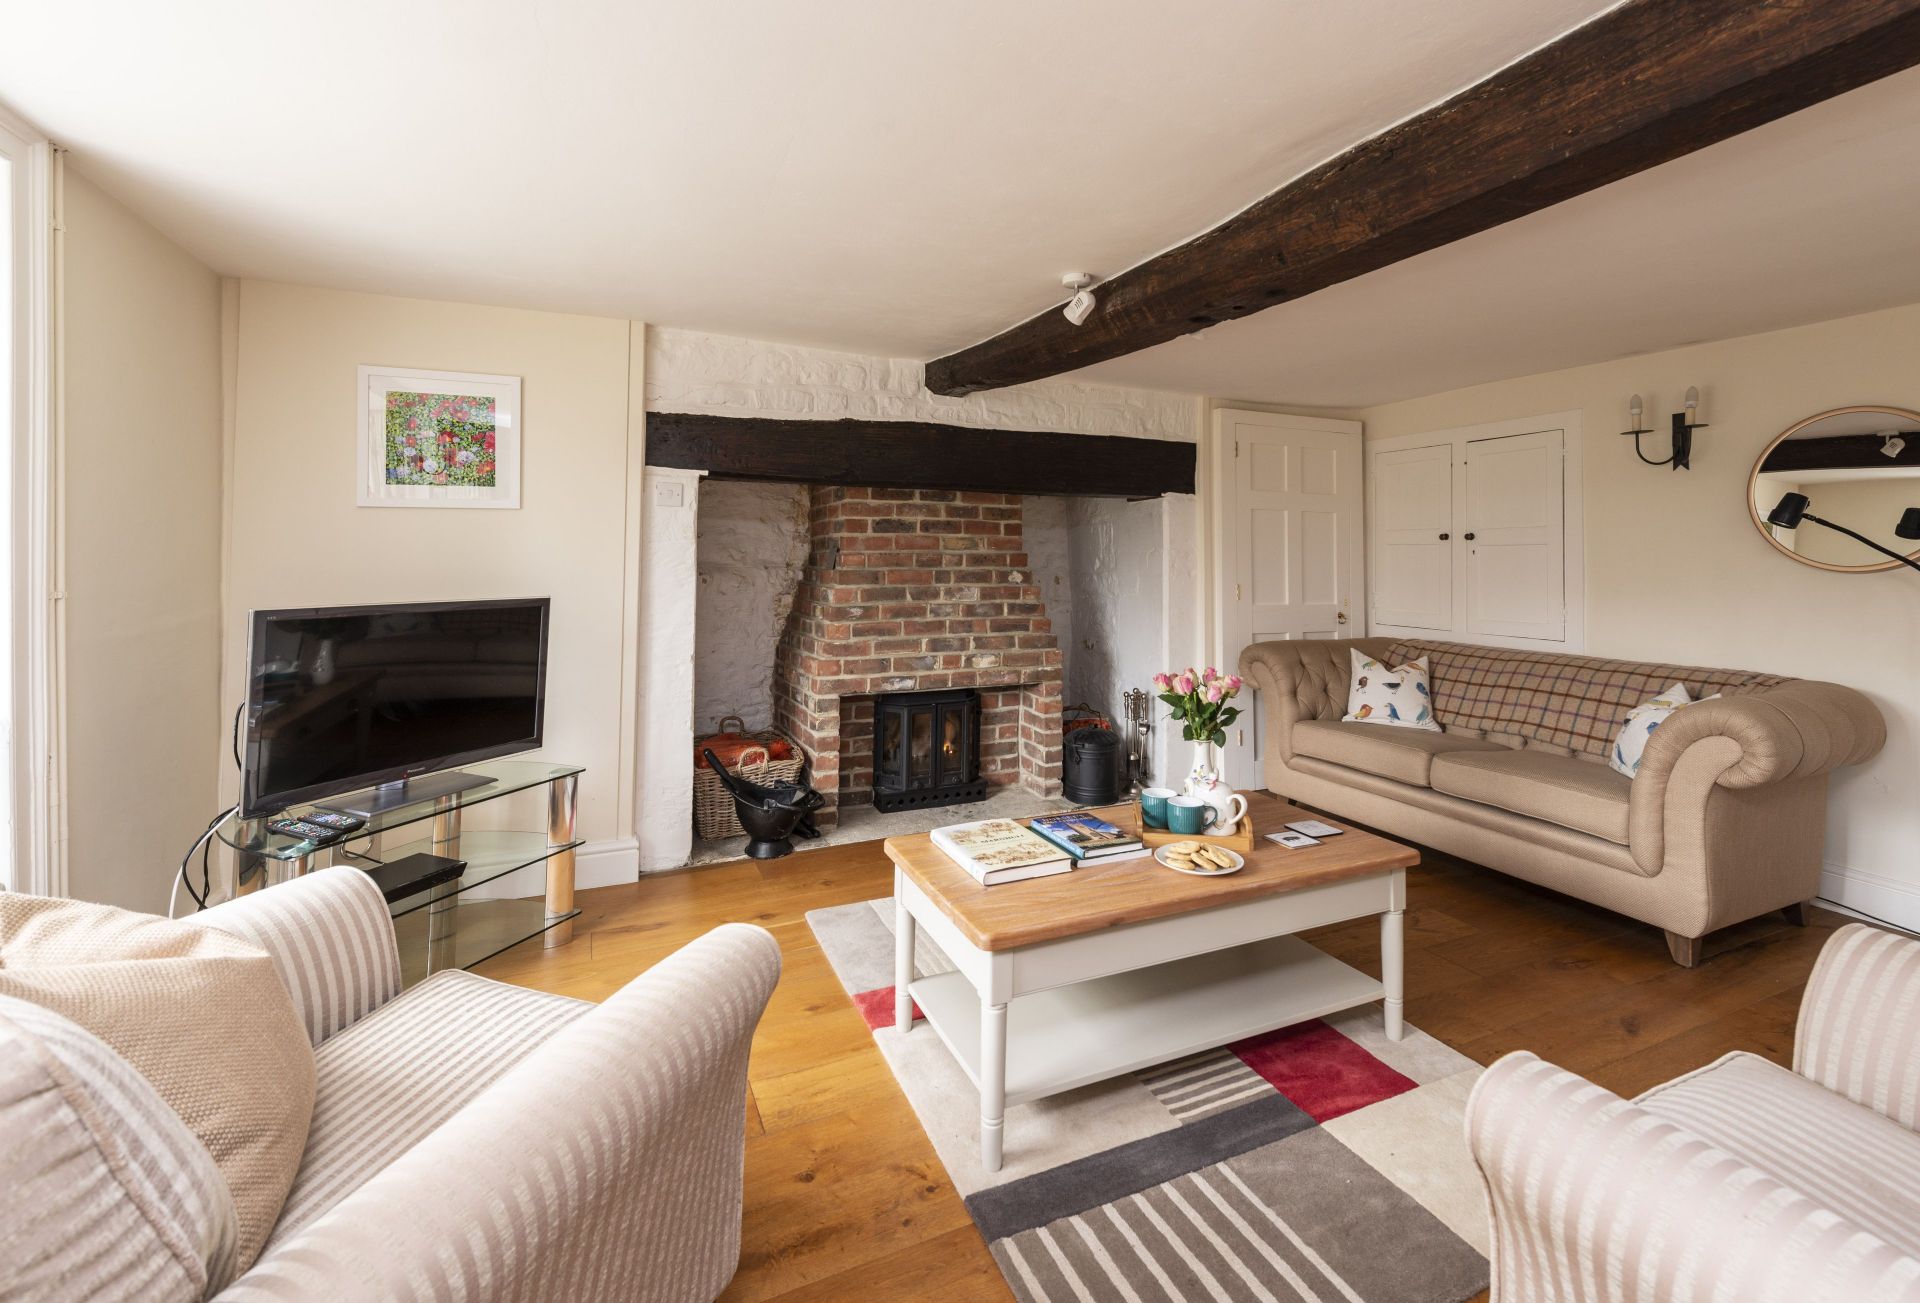 Bay Tree Cottage is located in Shaftesbury and surrounding villages